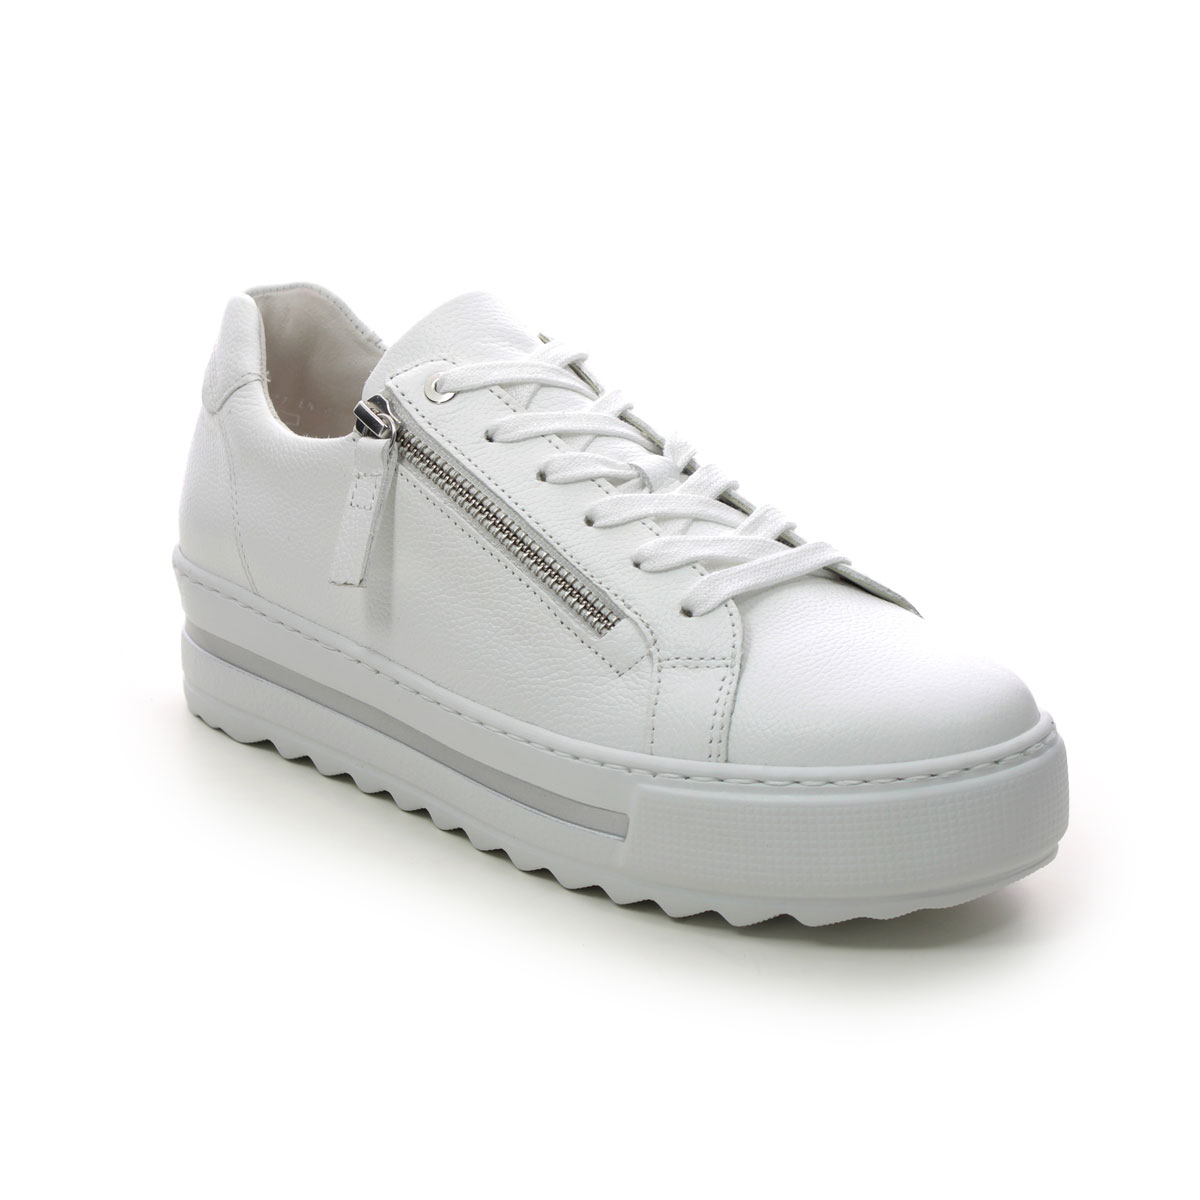 Gabor Heather White Leather Womens Trainers 26.498.50 In Size 7 In Plain White Leather  Womens Trainers In Soft White Leather Leather